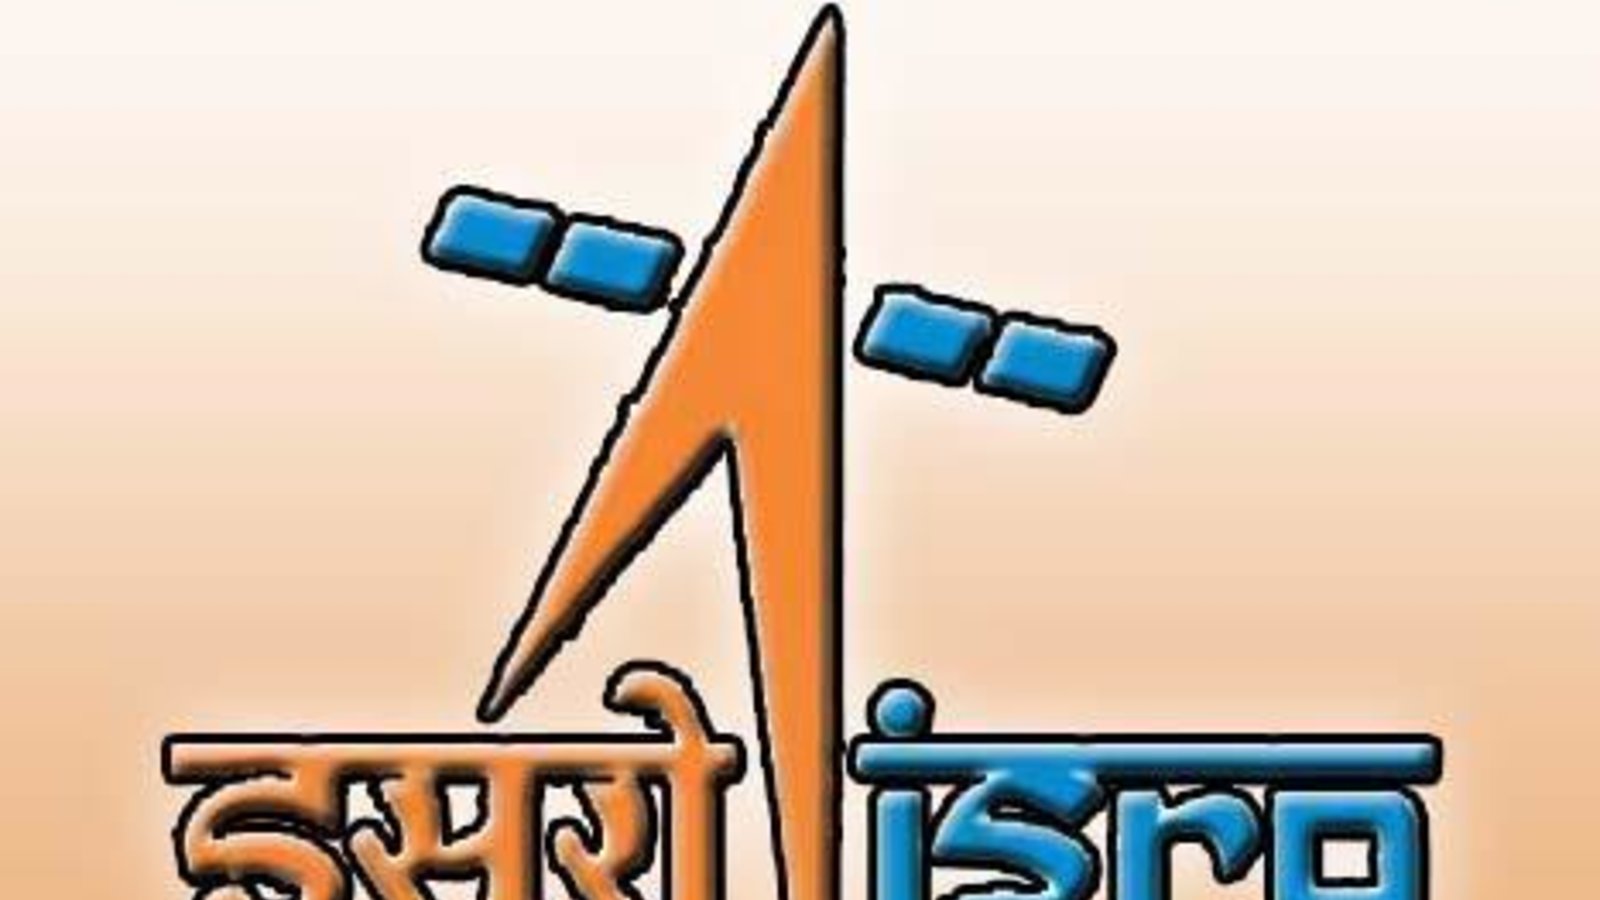 1339492322_396216455_1-pictures-of-isroindian-space-research-organisation.jpg